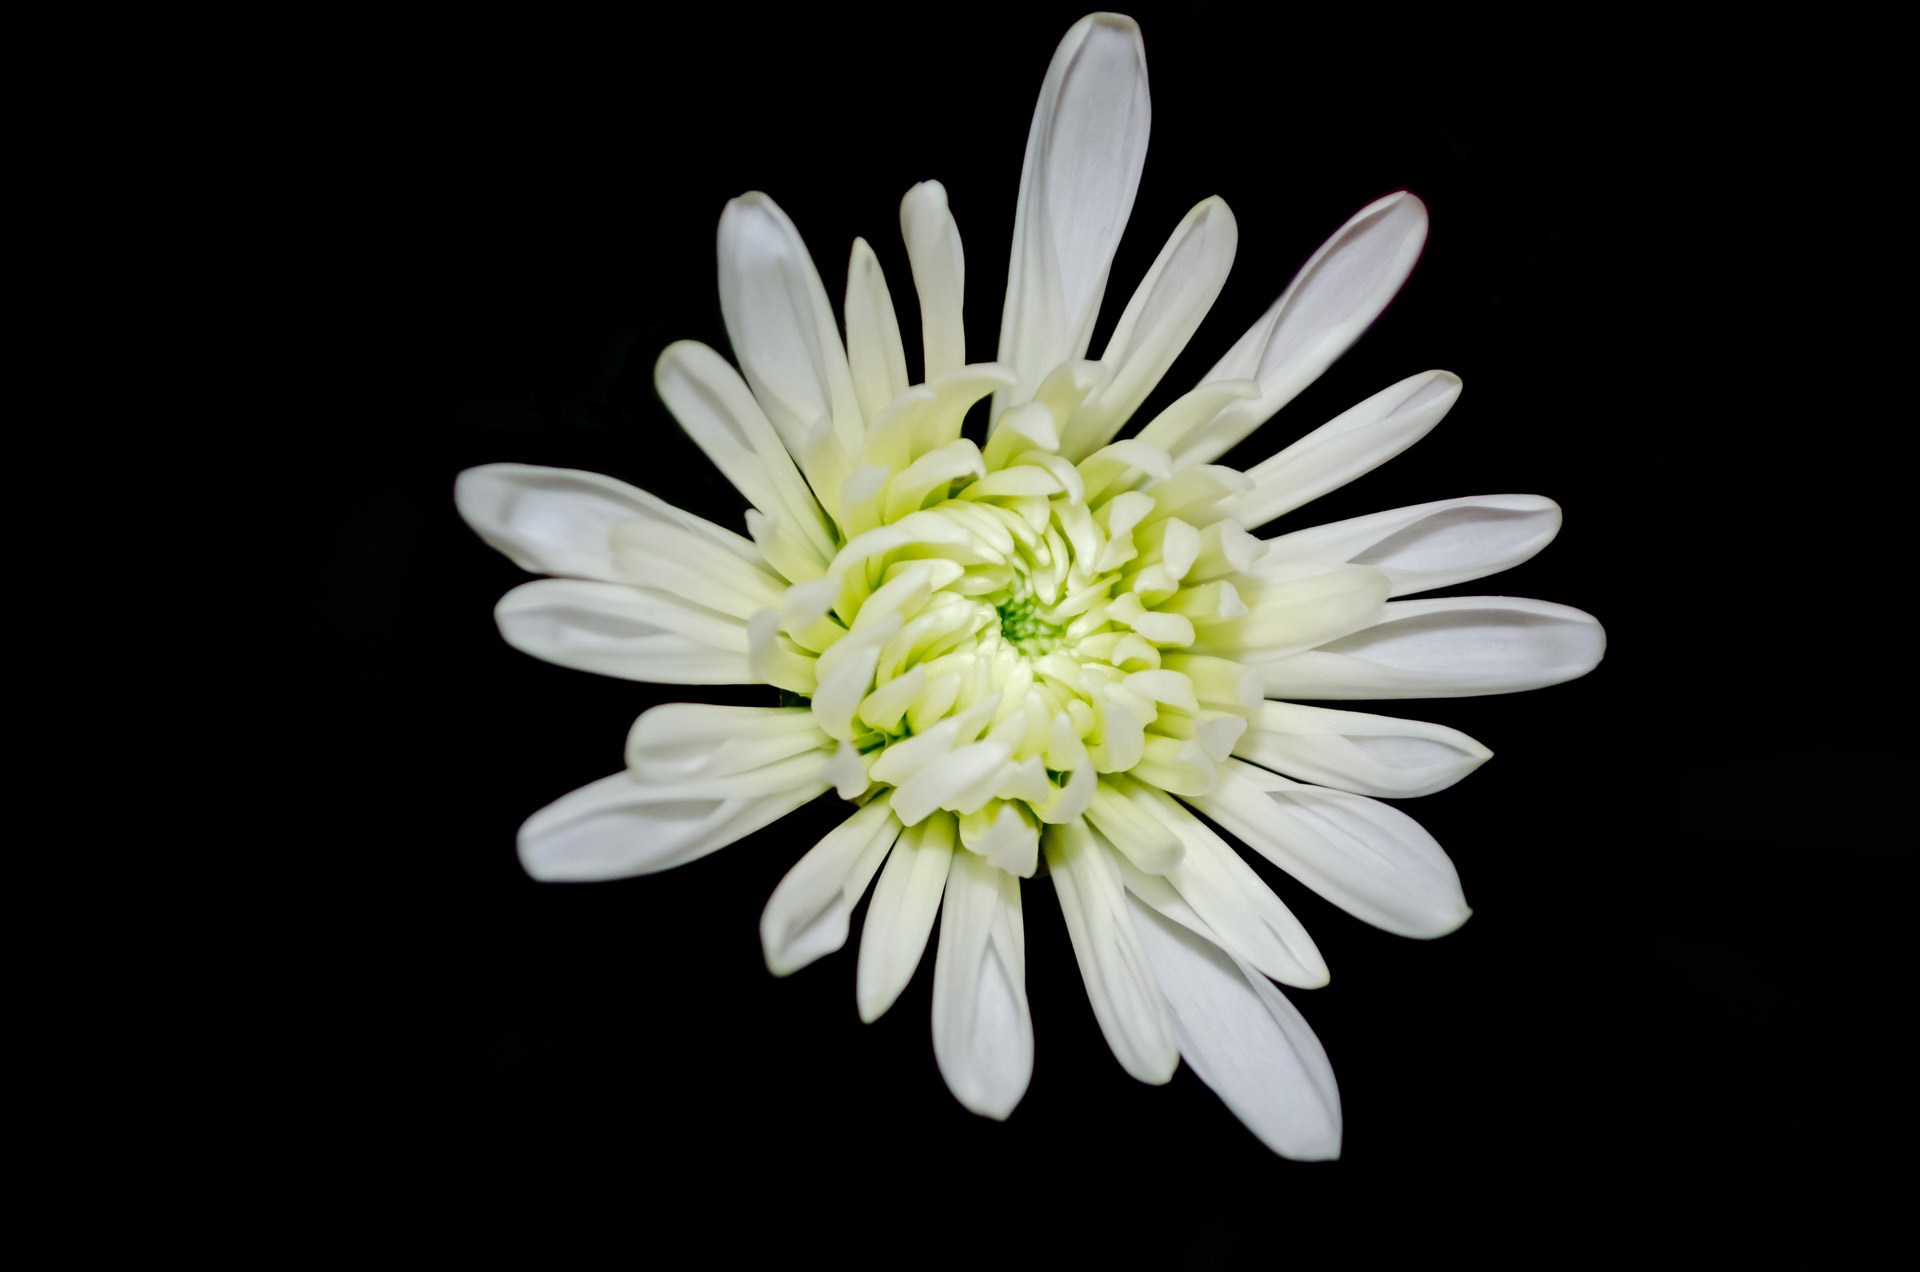 White Flower On Black Background Free Stock Photo - Public Domain Pictures